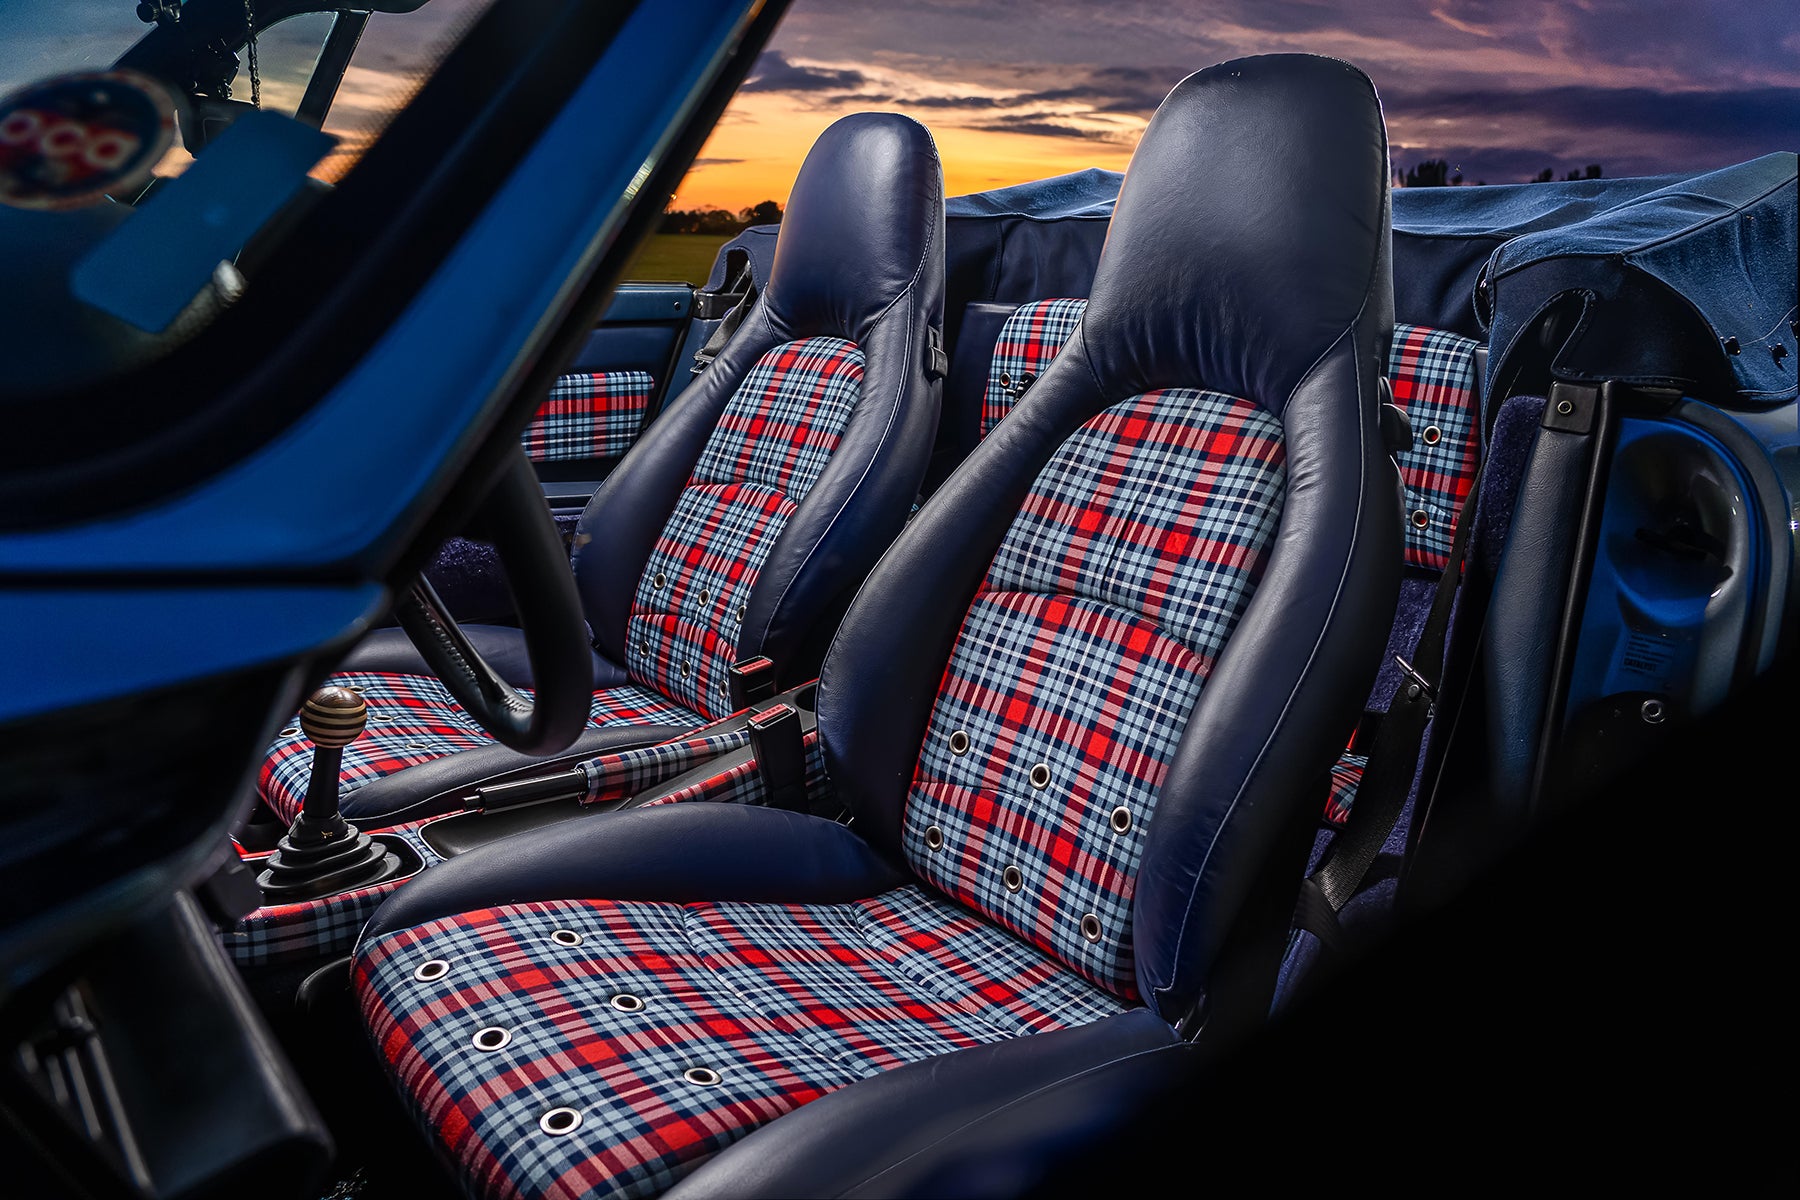 Relicate Leather Spirt of Le Mans Plaid Tartan Cloth Fabric